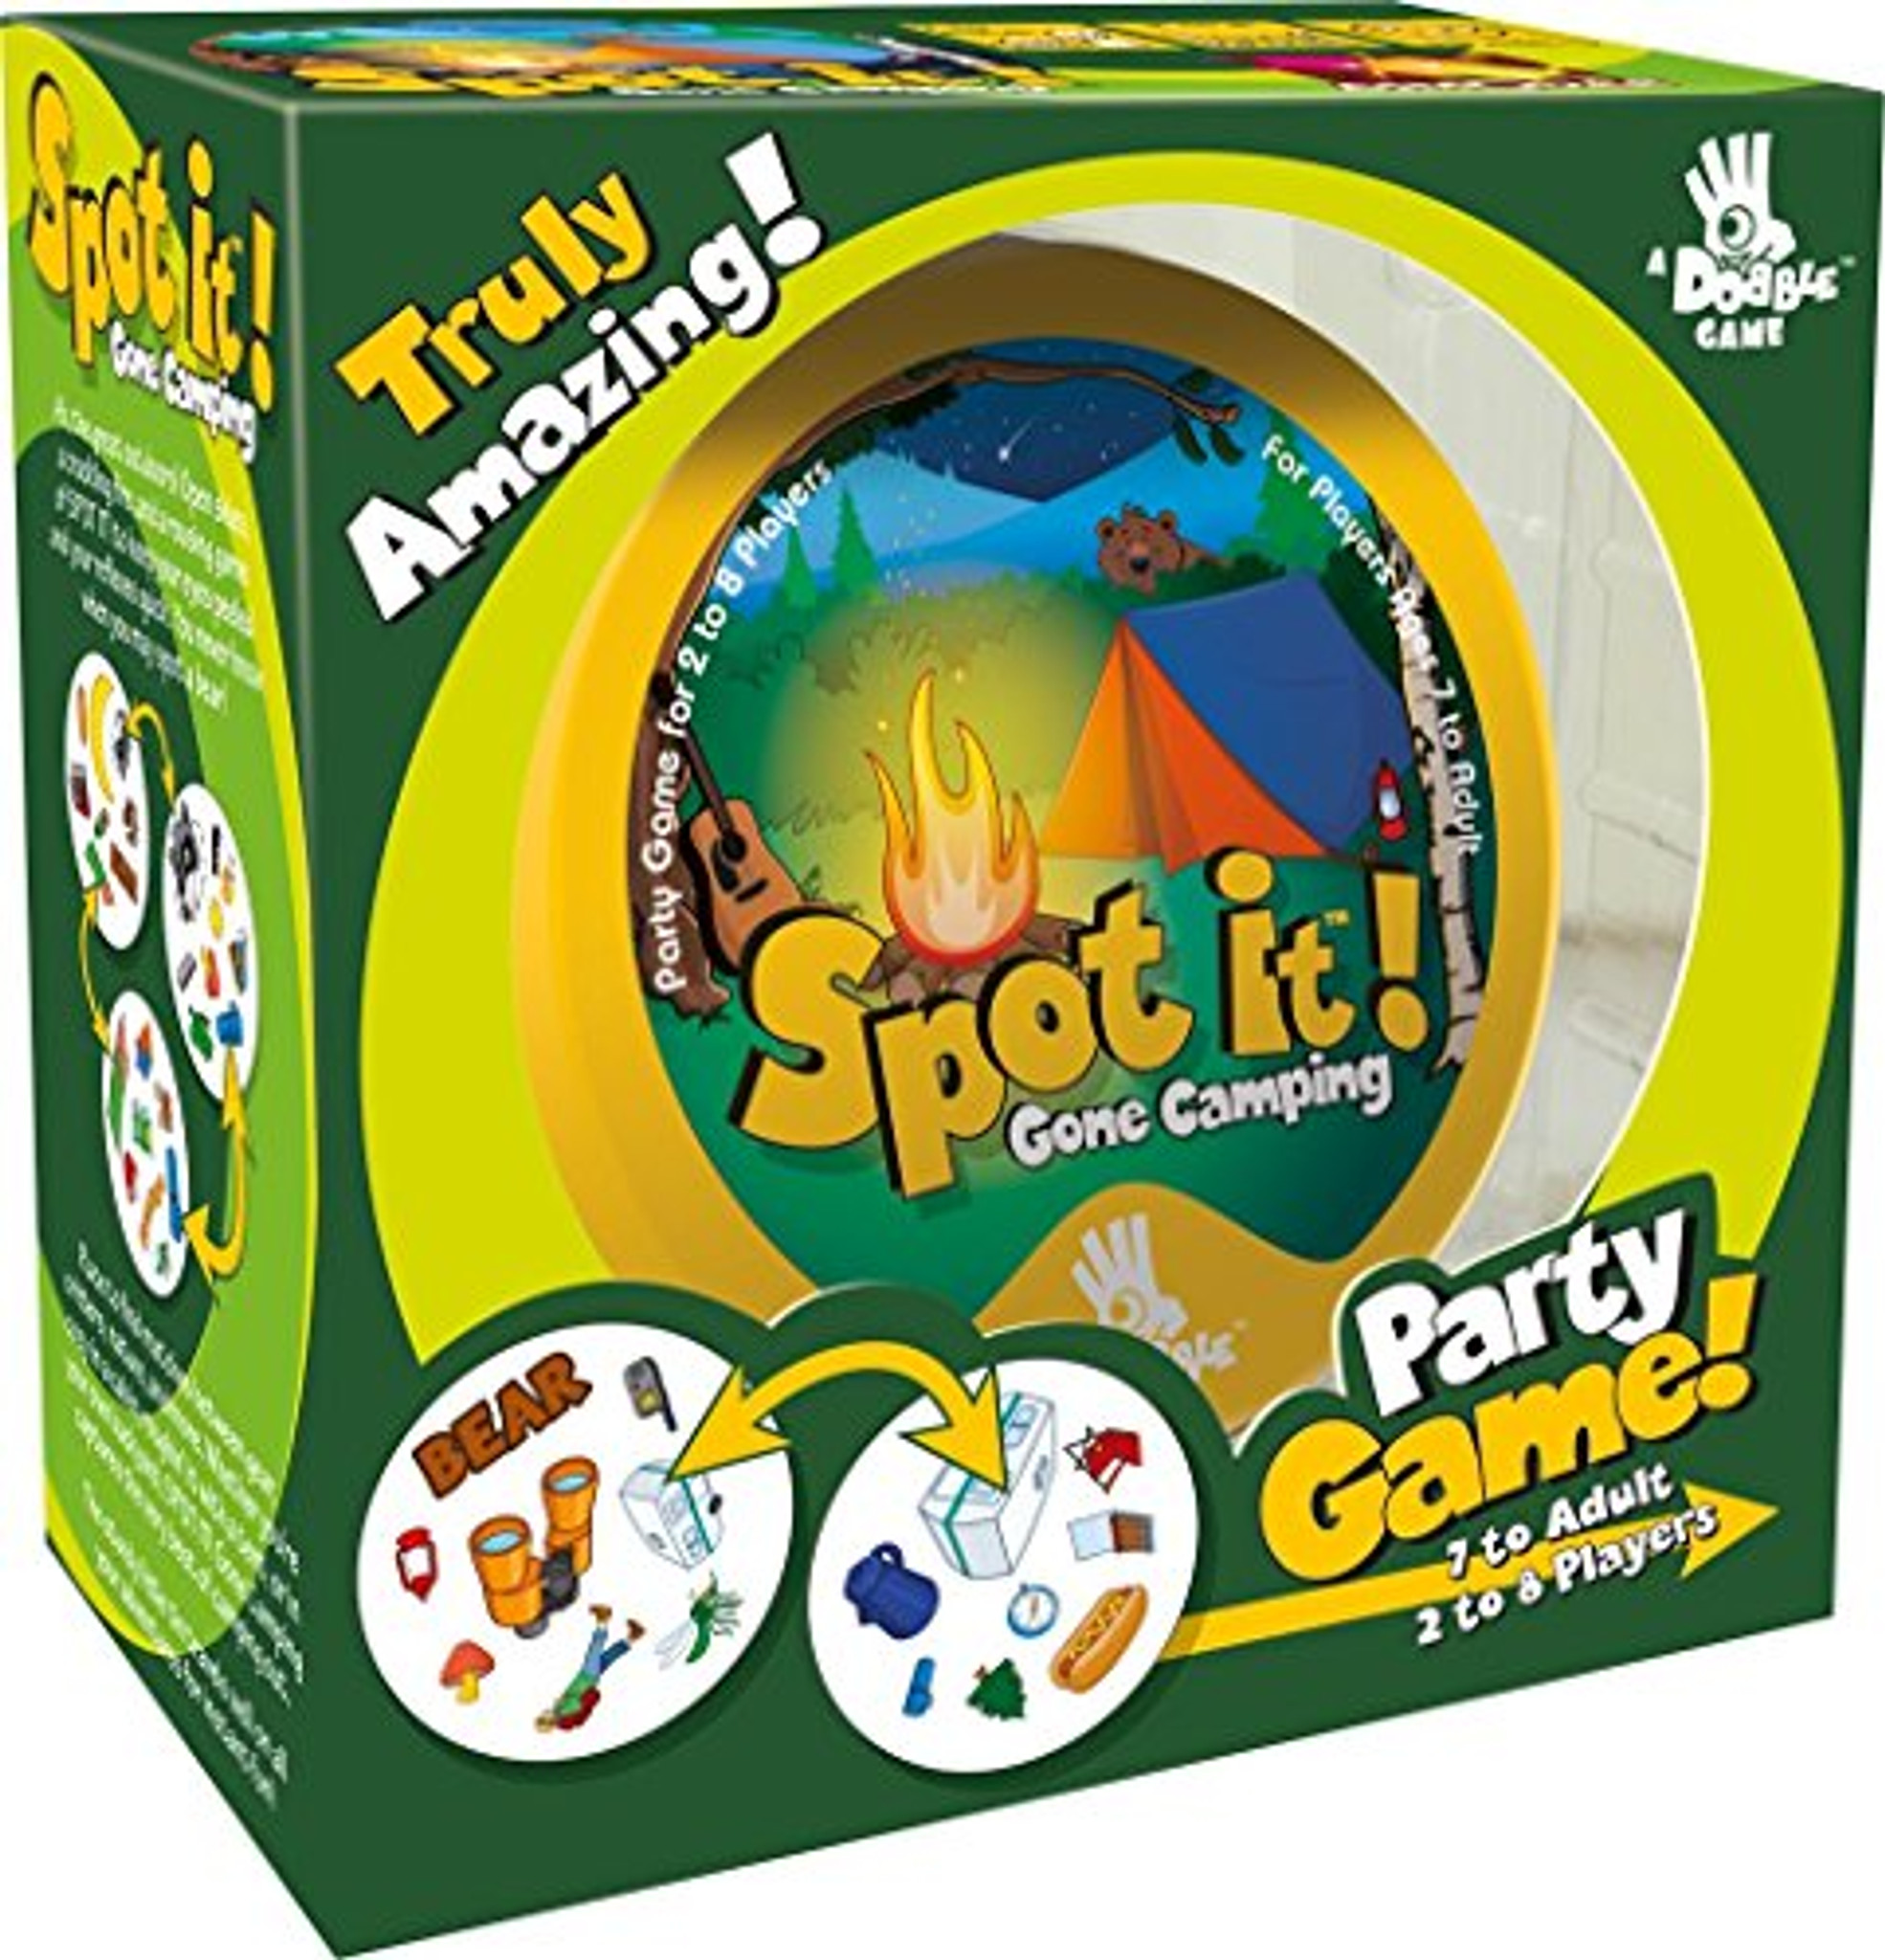 Dobble Spot It Camping Card Game For Kids In Metal Tin Box ▻   ▻ Free Shipping ▻ Up to 70% OFF